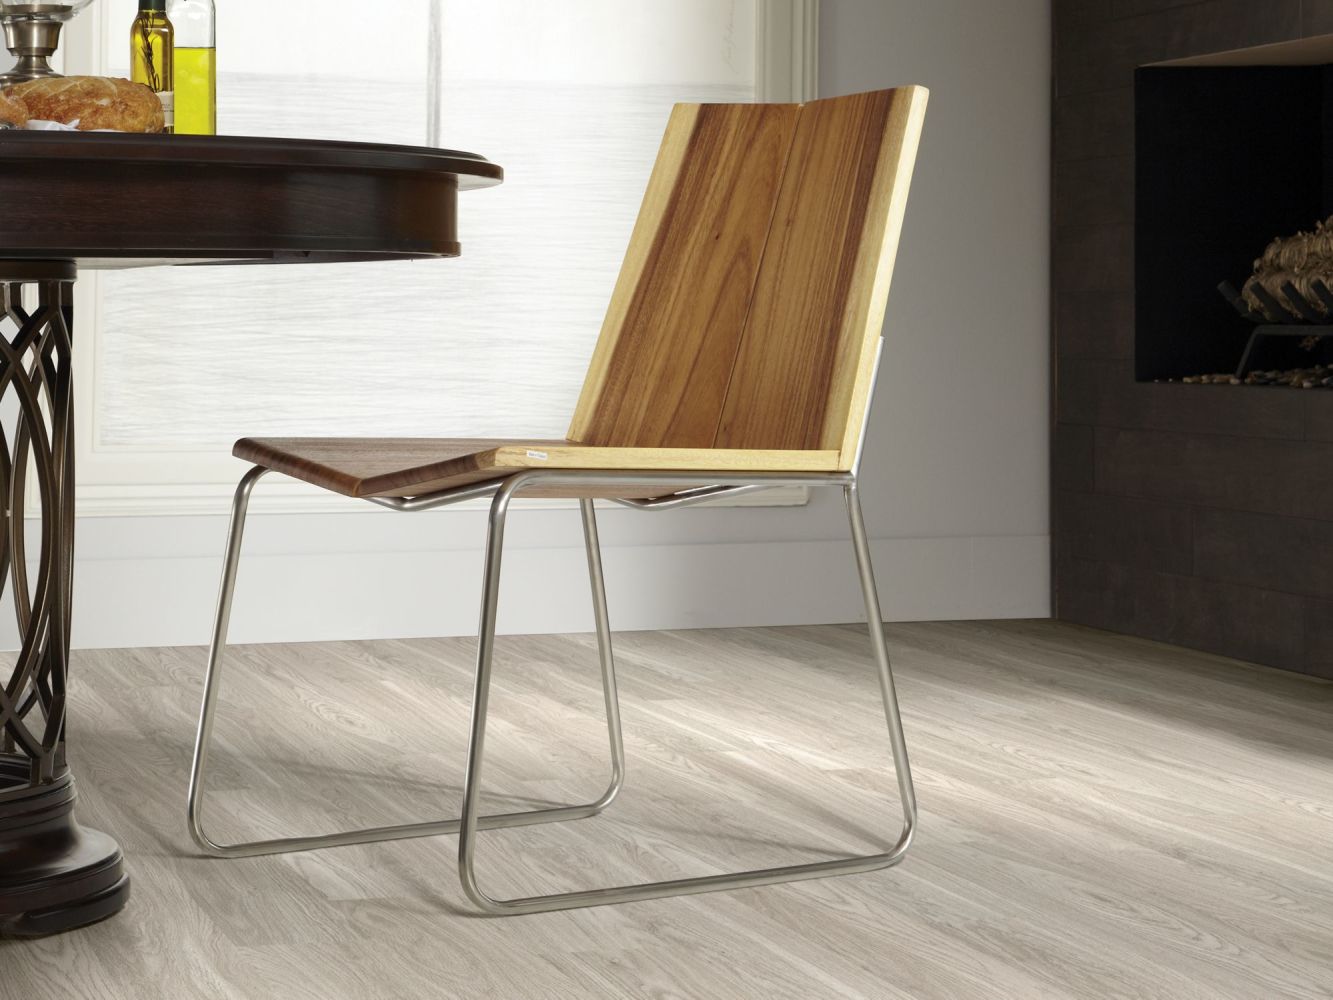 Shaw Floors Resilient Residential Partridge Plus Plank Shadow 00520_FR262